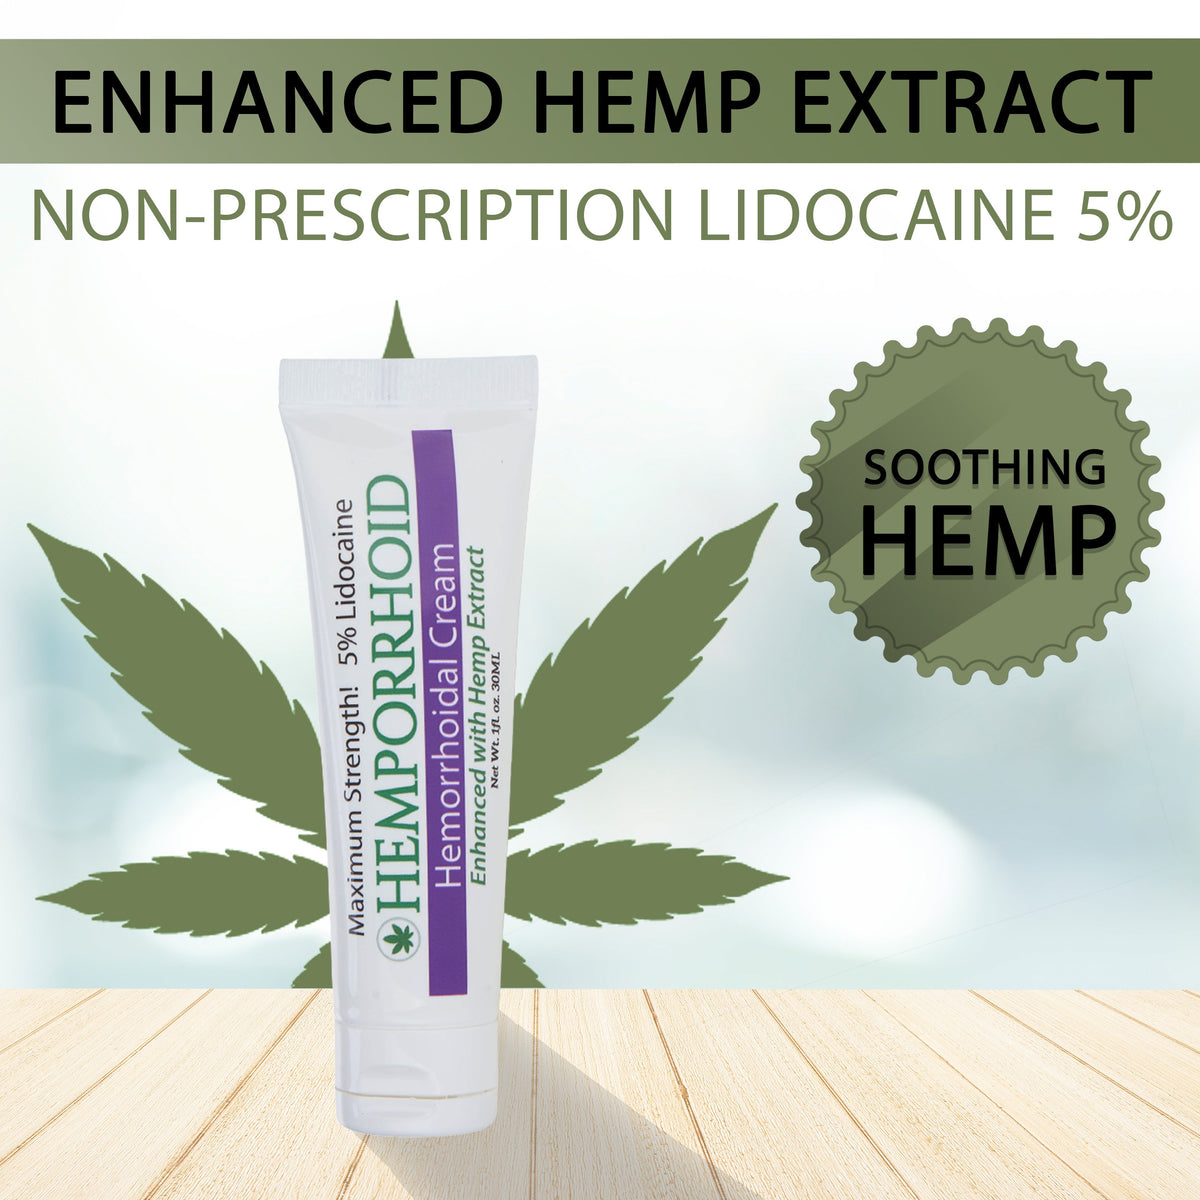 HEMPORRHOID 5% Lidocaine with Hemp Oil - Hemorrhoid Topical Numbing Cream - 1OZ - for Sections, Hemmoroid, Local and Anorectal Discomfort